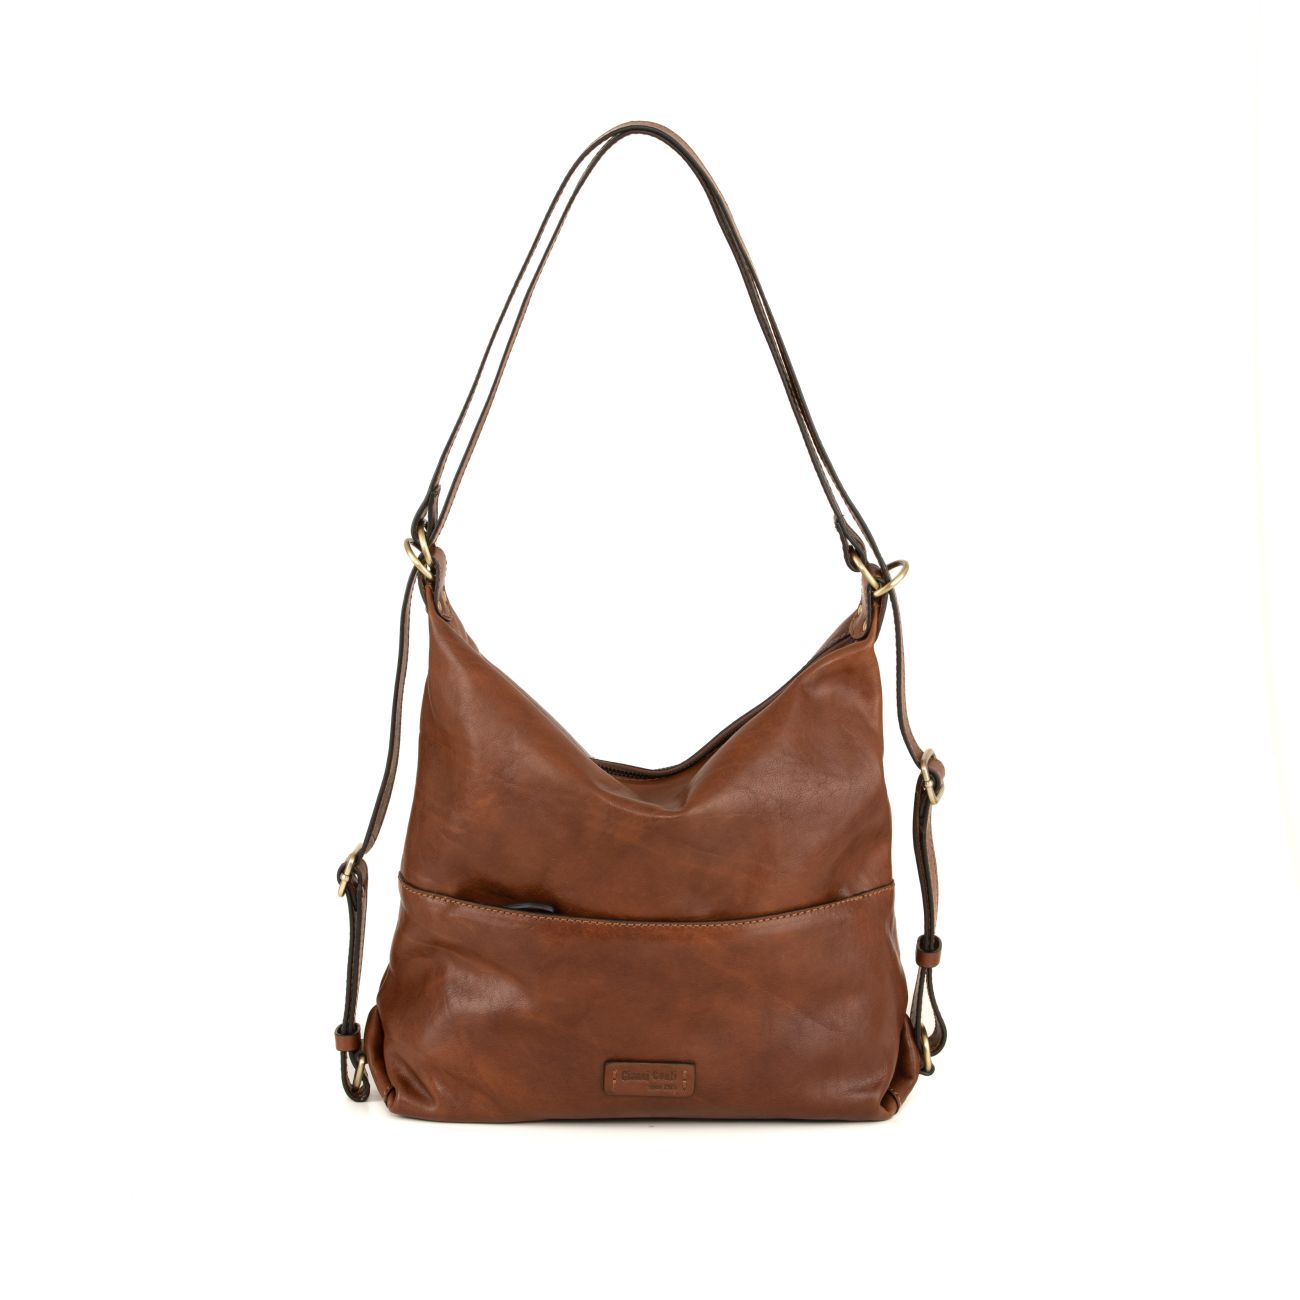 Patsy Convertible Leather Backpack by Gianni Conti